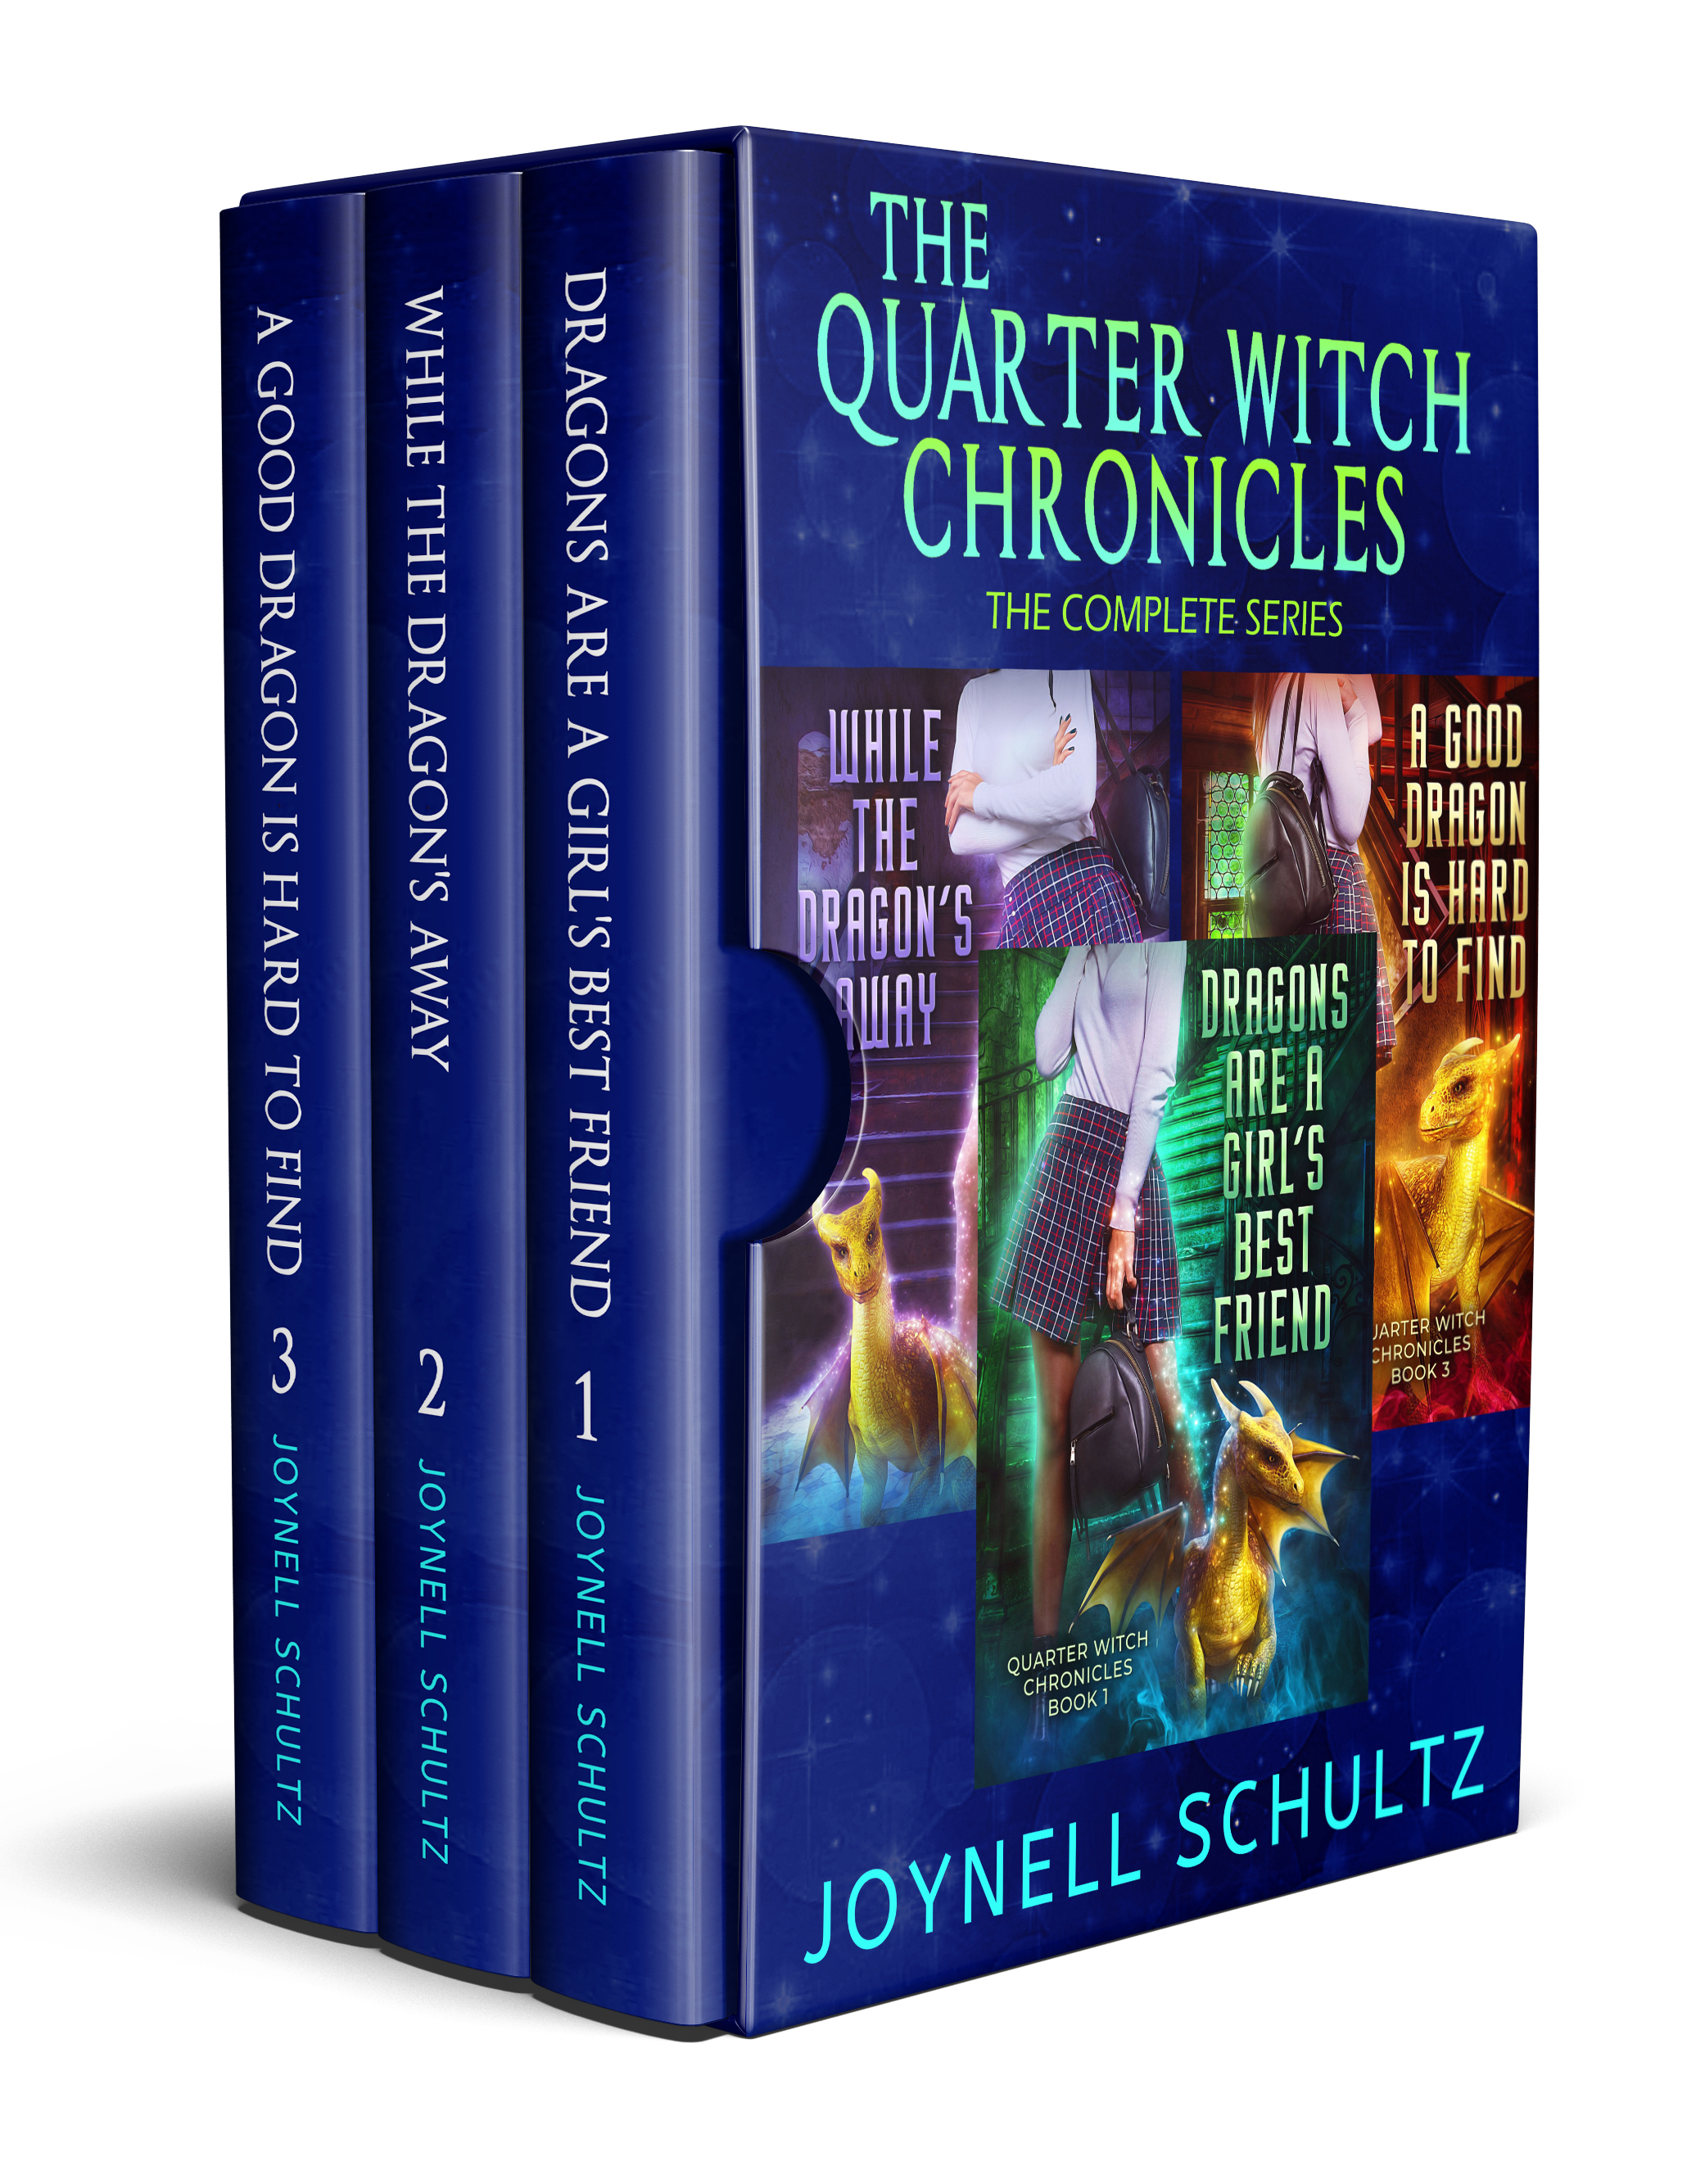 Face Lift for “Quarter Witch Chronicles” Box Set